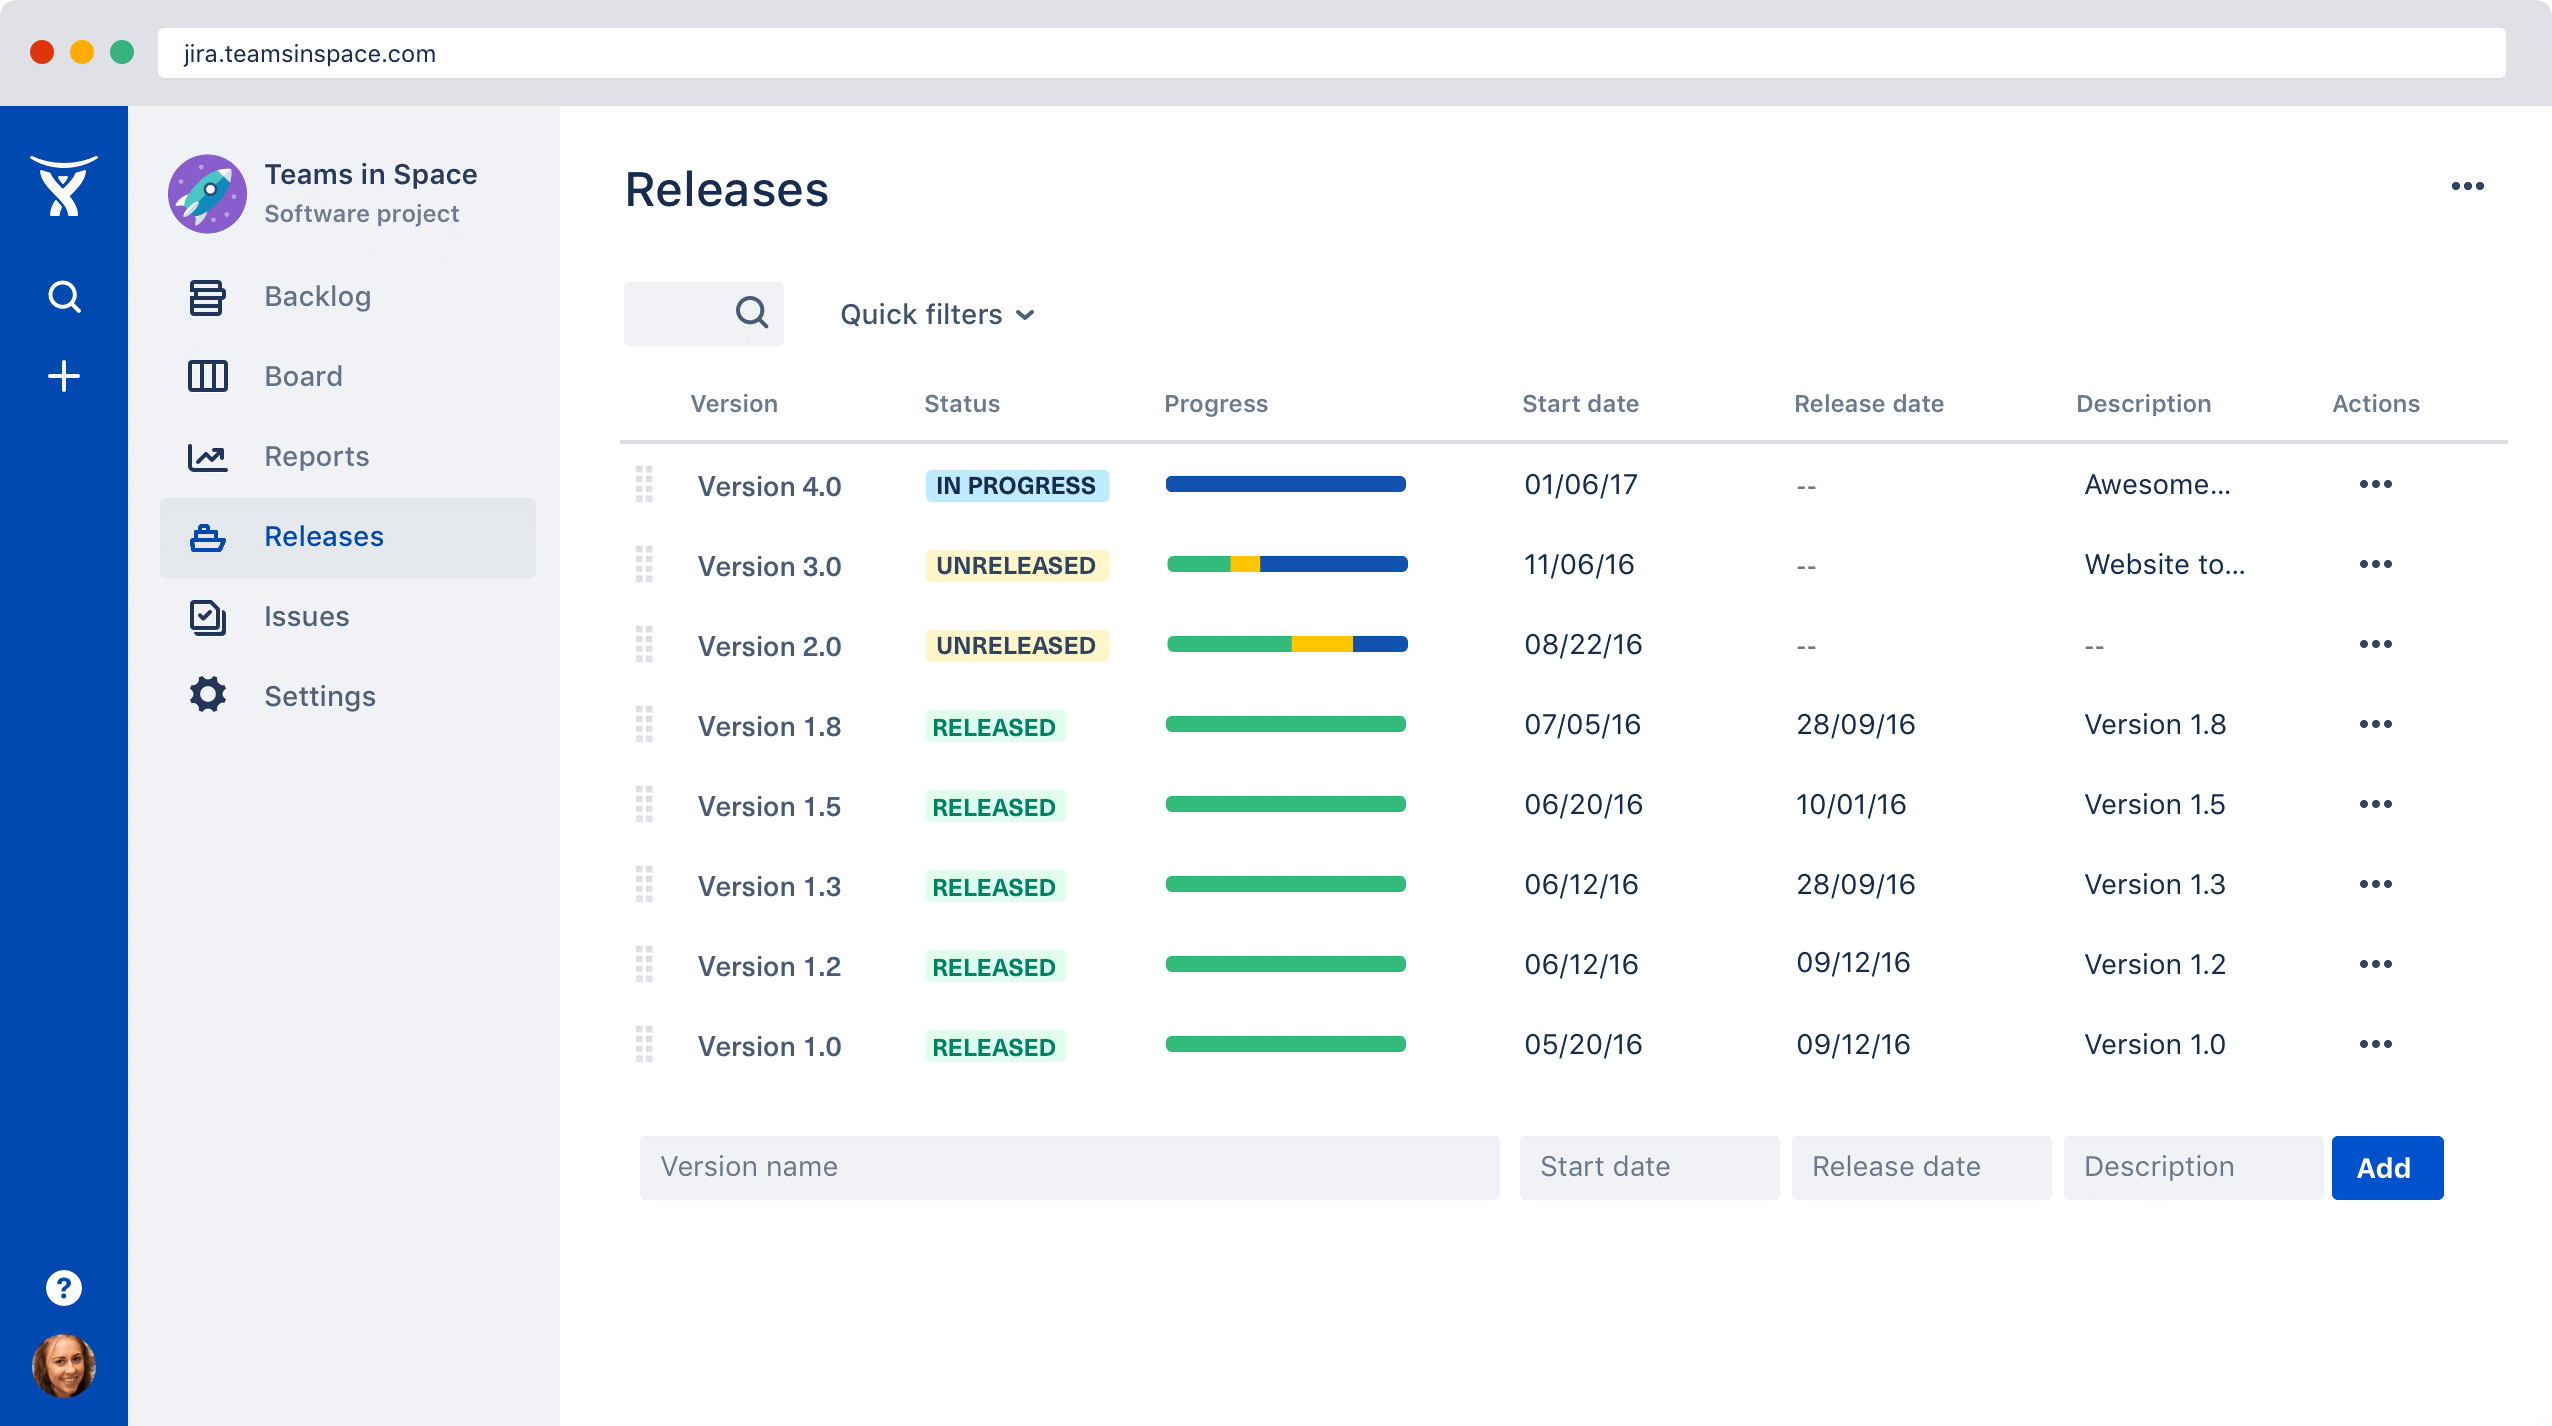 Release feature of Jira